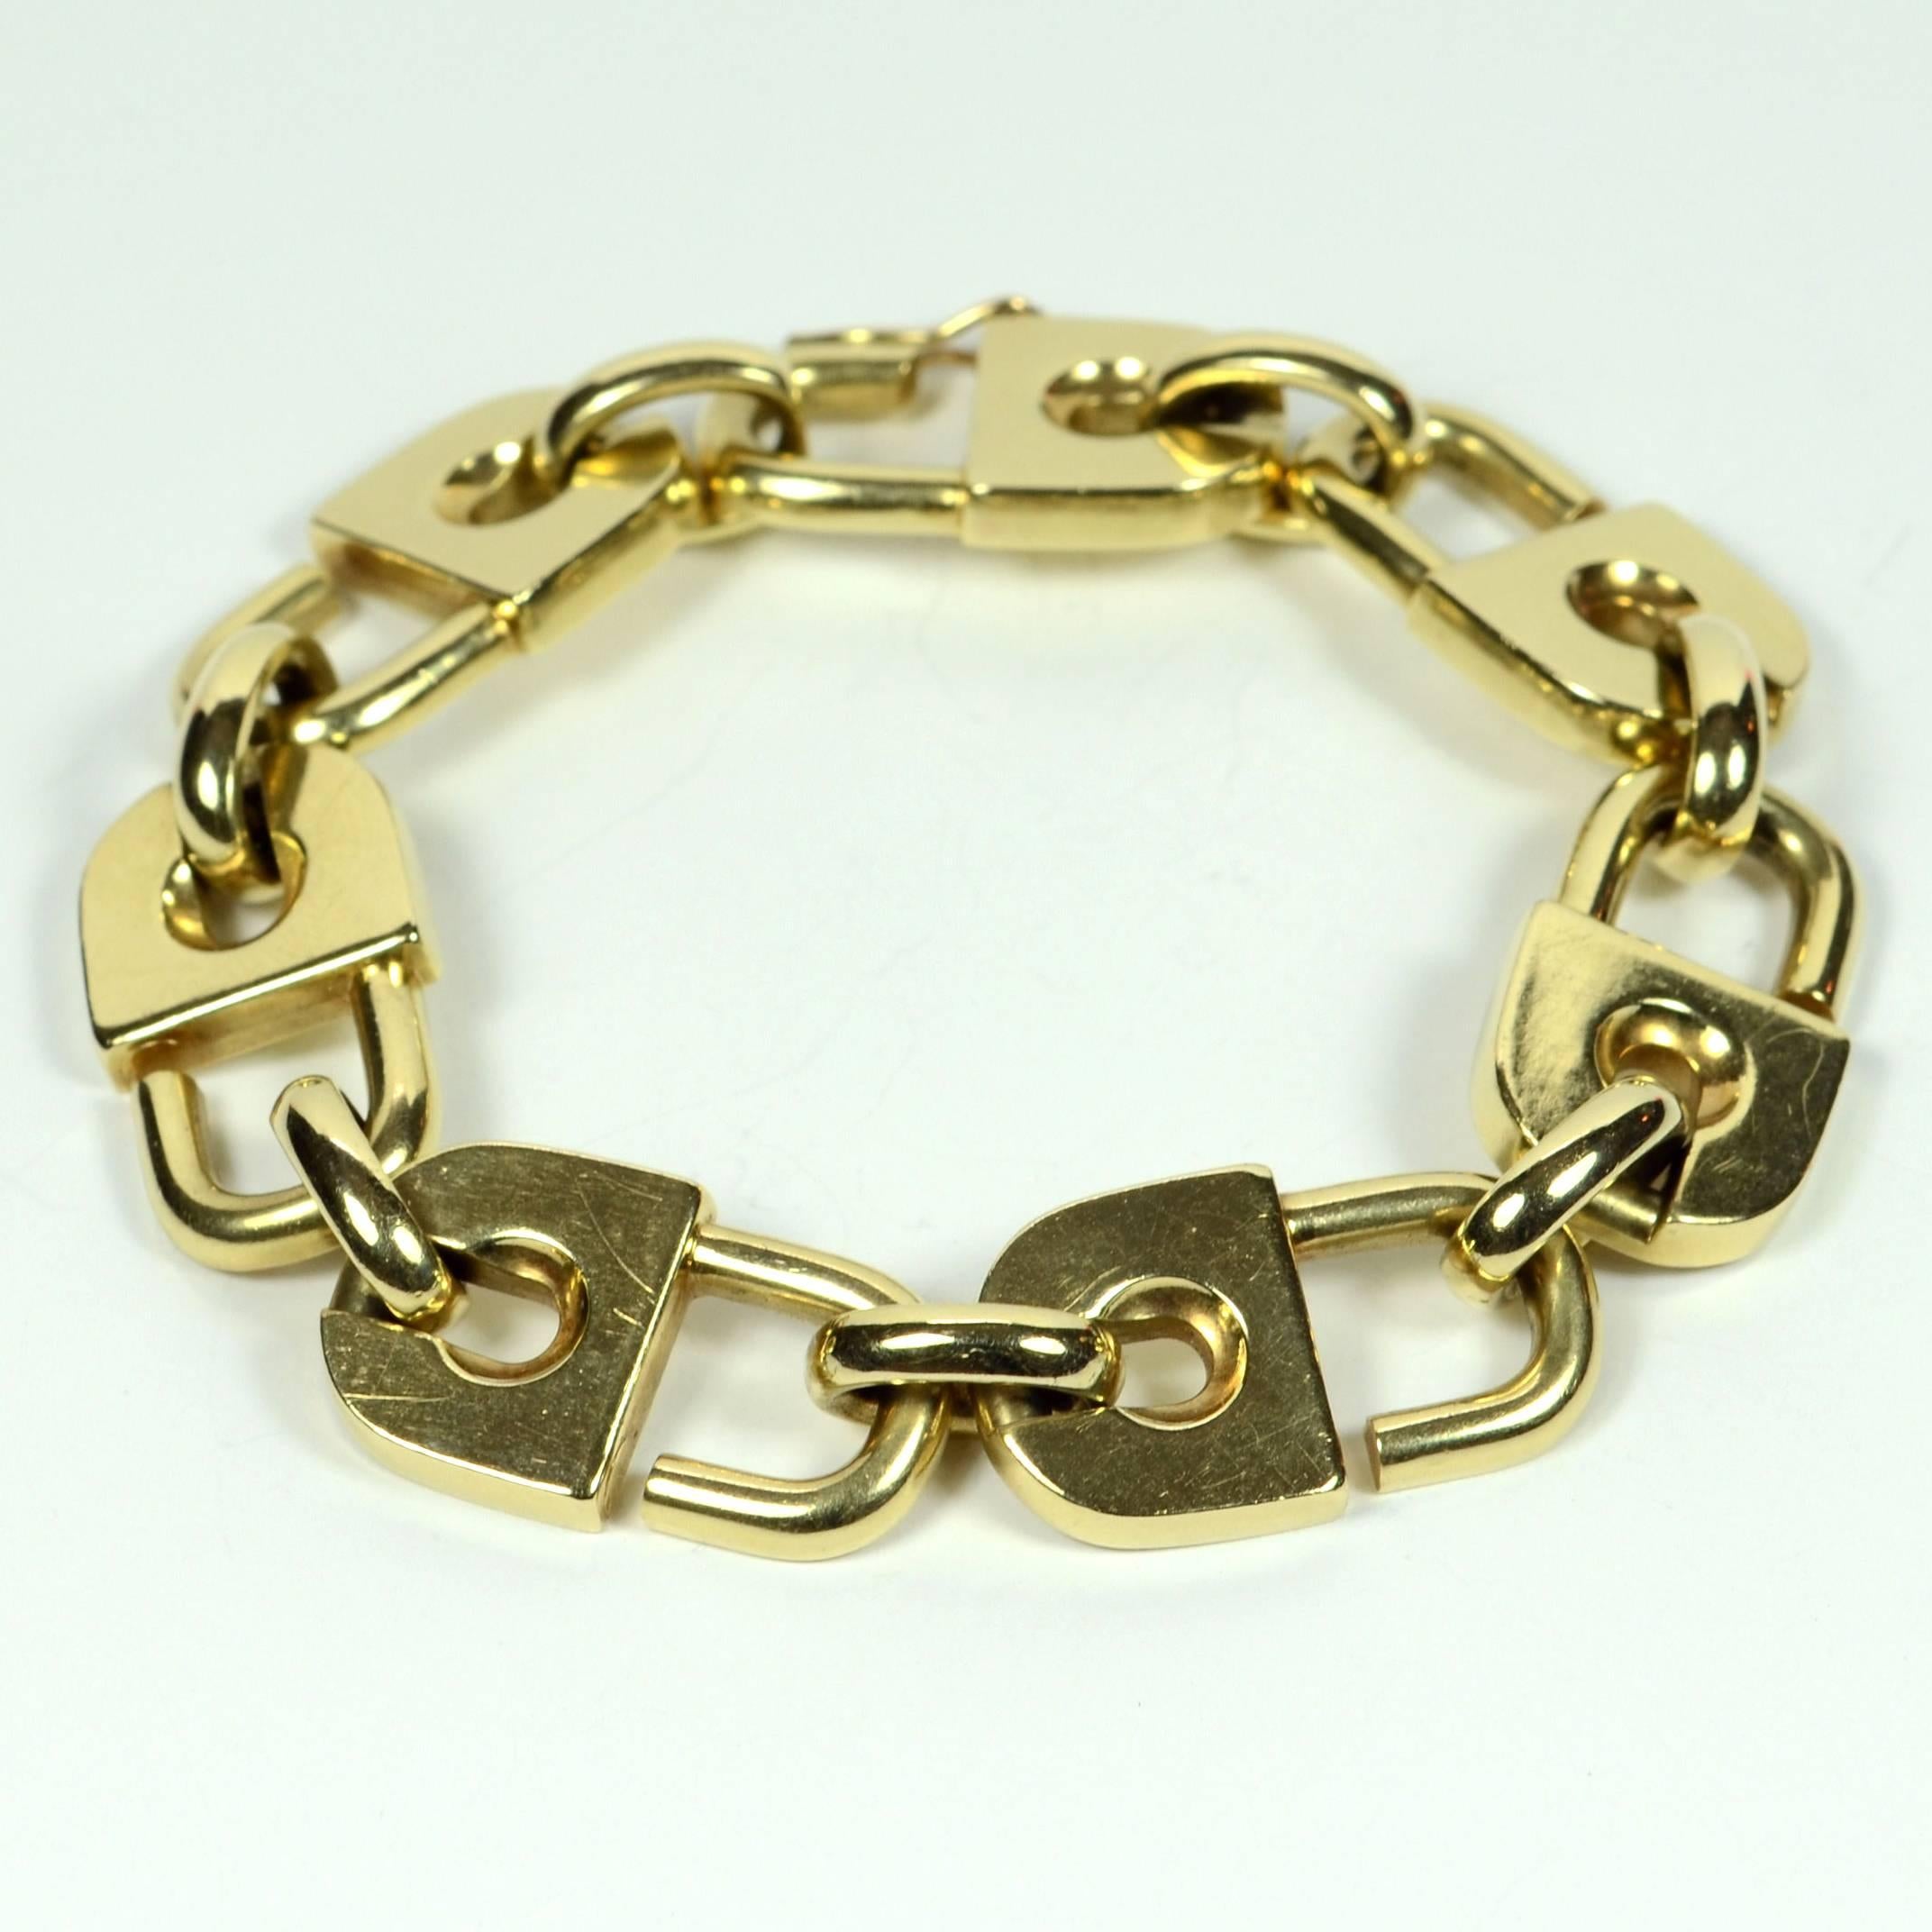 This incredibly cool gold bracelet is designed as seven padlocks locked together to form a continuous chain around the wrist, and is secured with a safety catch.  

Crafted in 14 carat gold, it is marked ‘Germany’, with an unknown makers mark.

Each